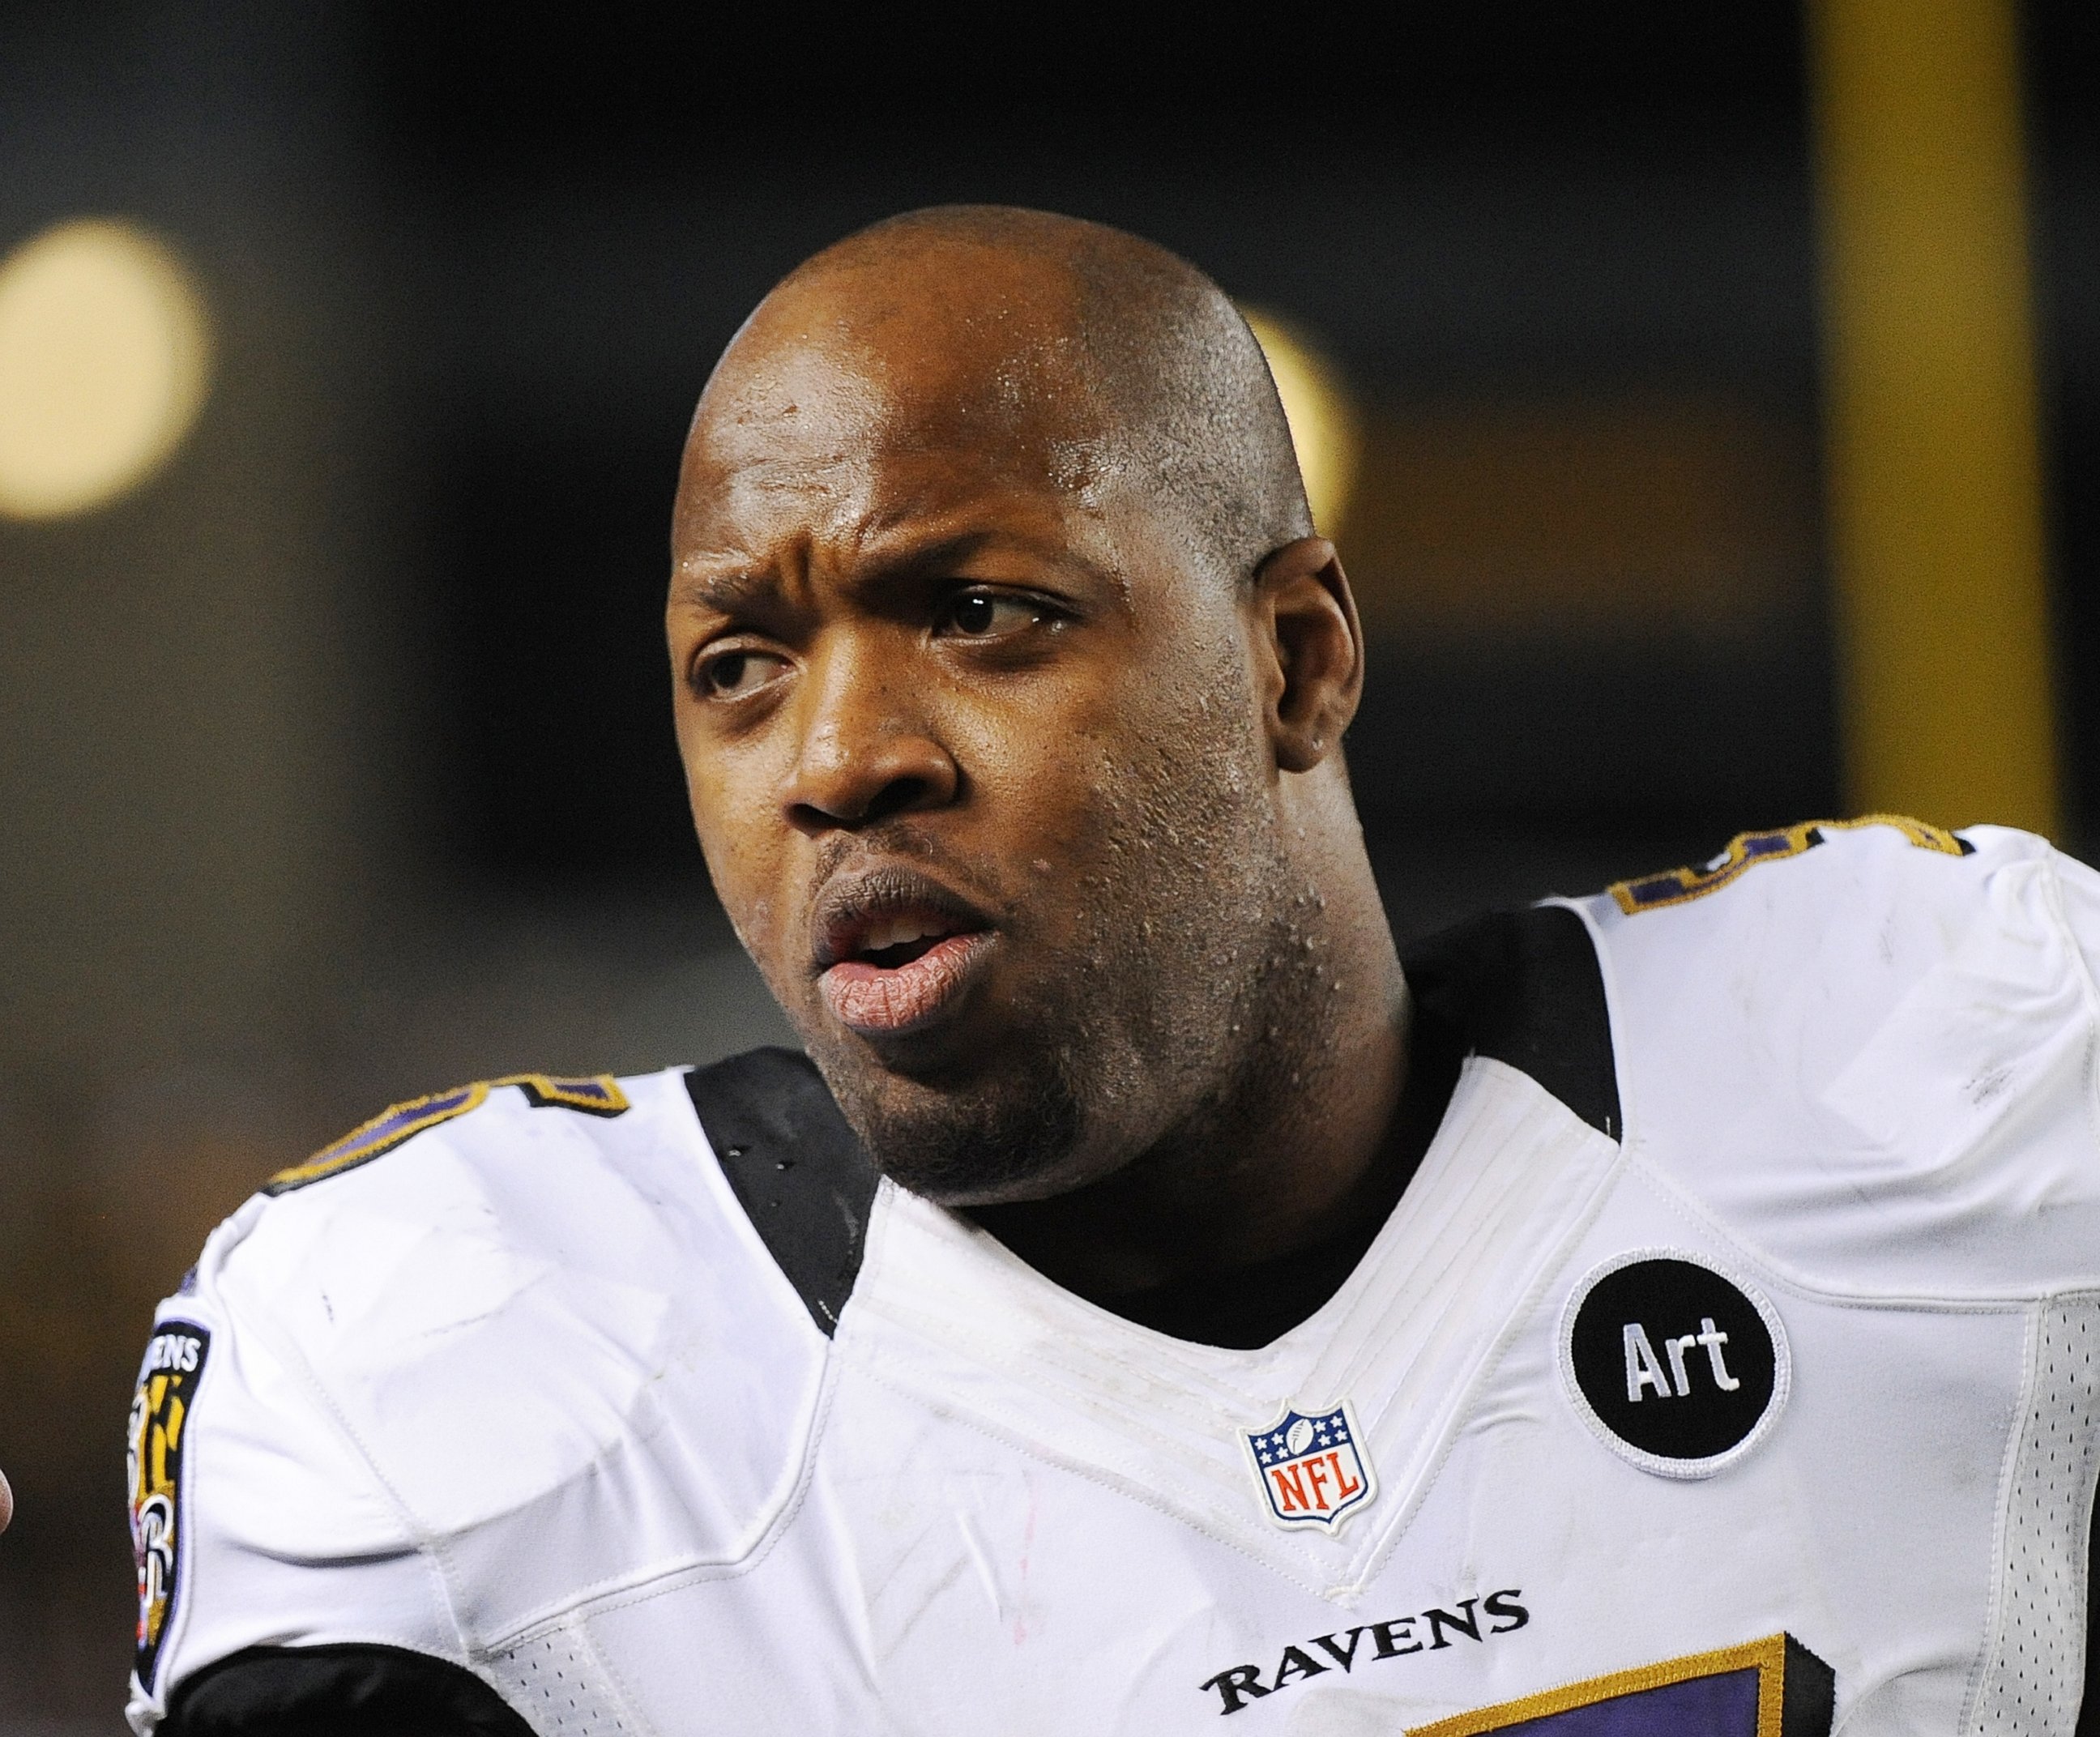 PHOTO: Linebacker Terrell Suggs of the Baltimore Ravens looks on from the sideline during a game at Heinz Field on Nov. 18, 2012 in Pittsburgh, Pa.